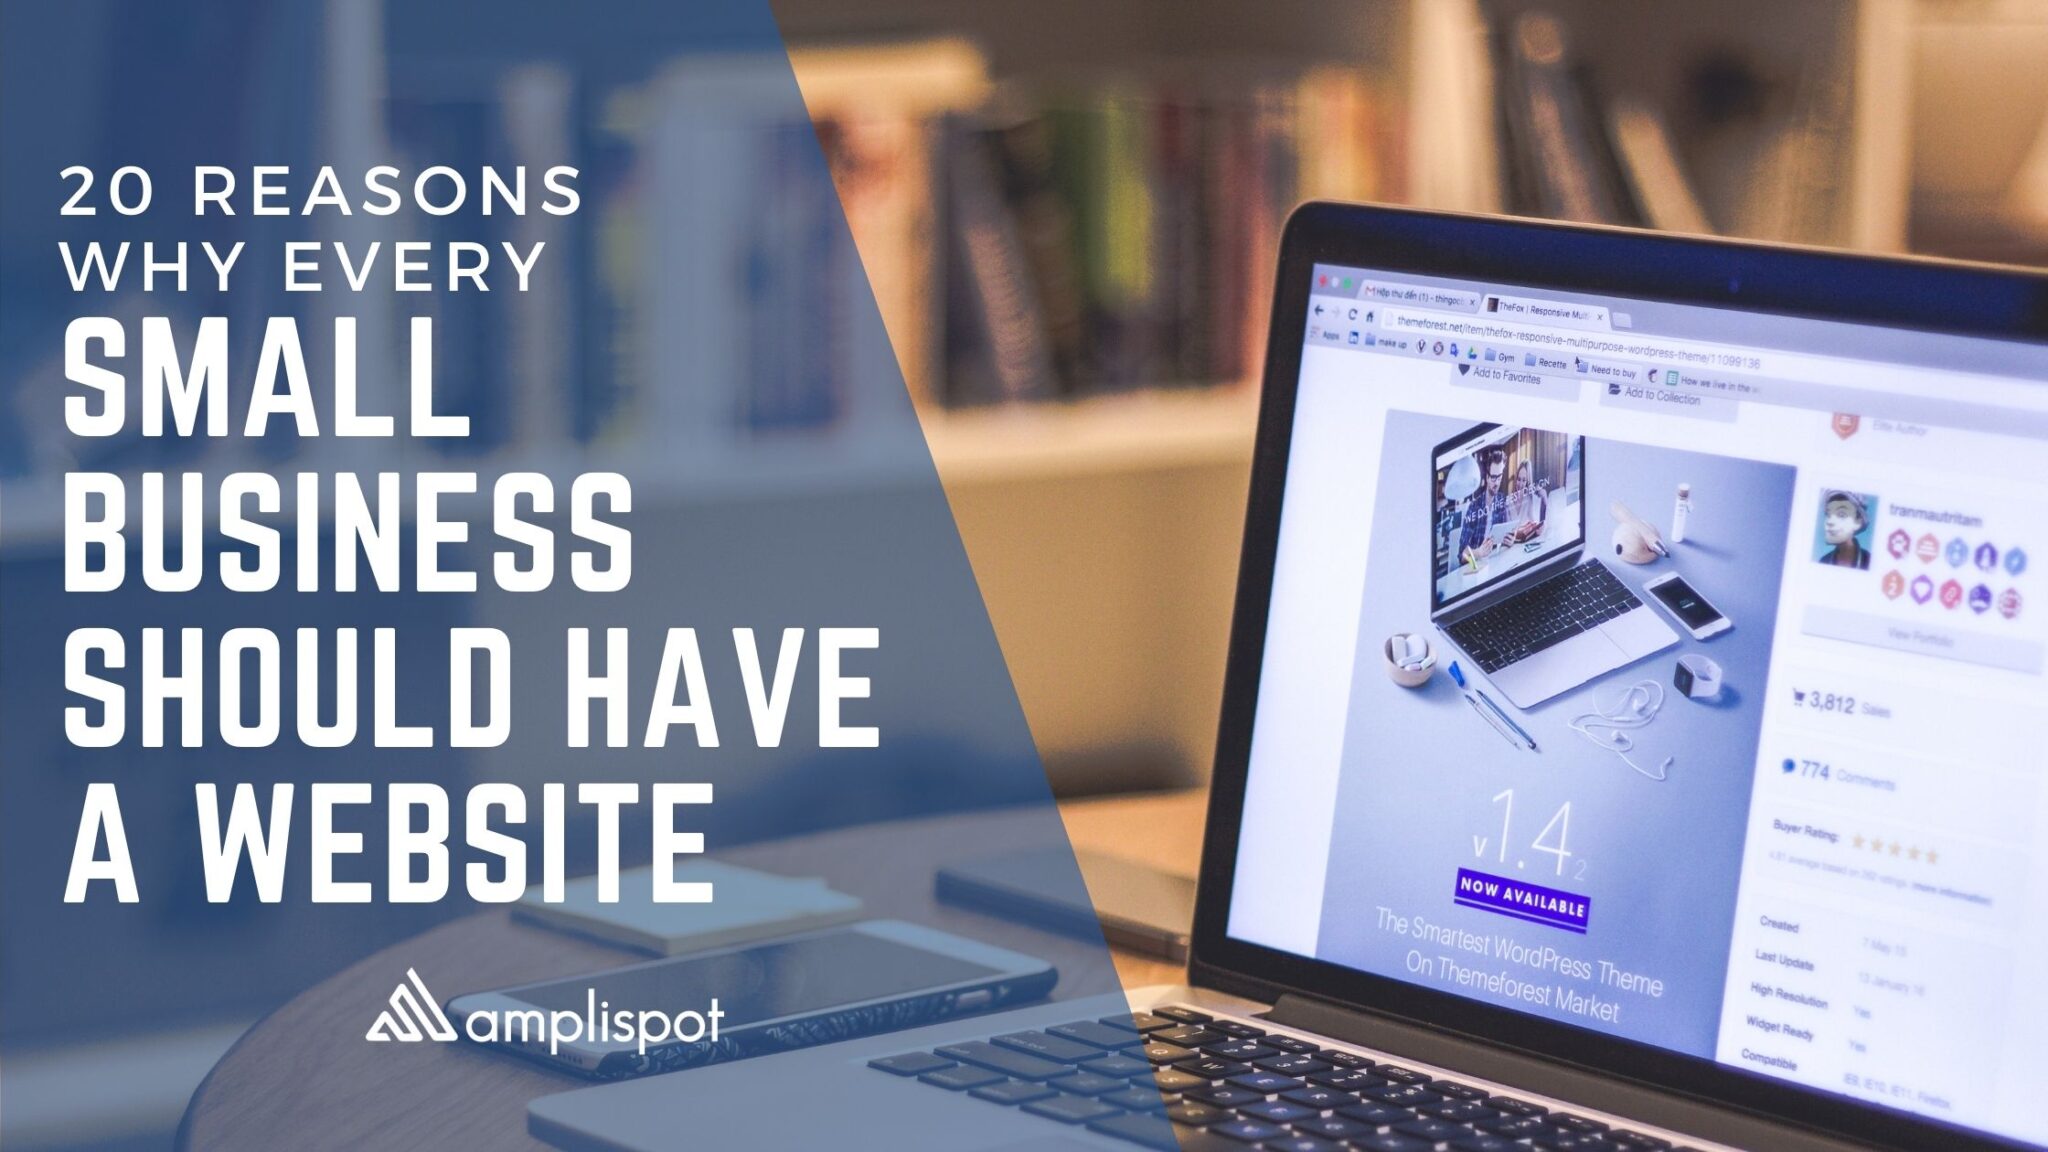 20 Reasons Why Every Small Business Should Have A Website